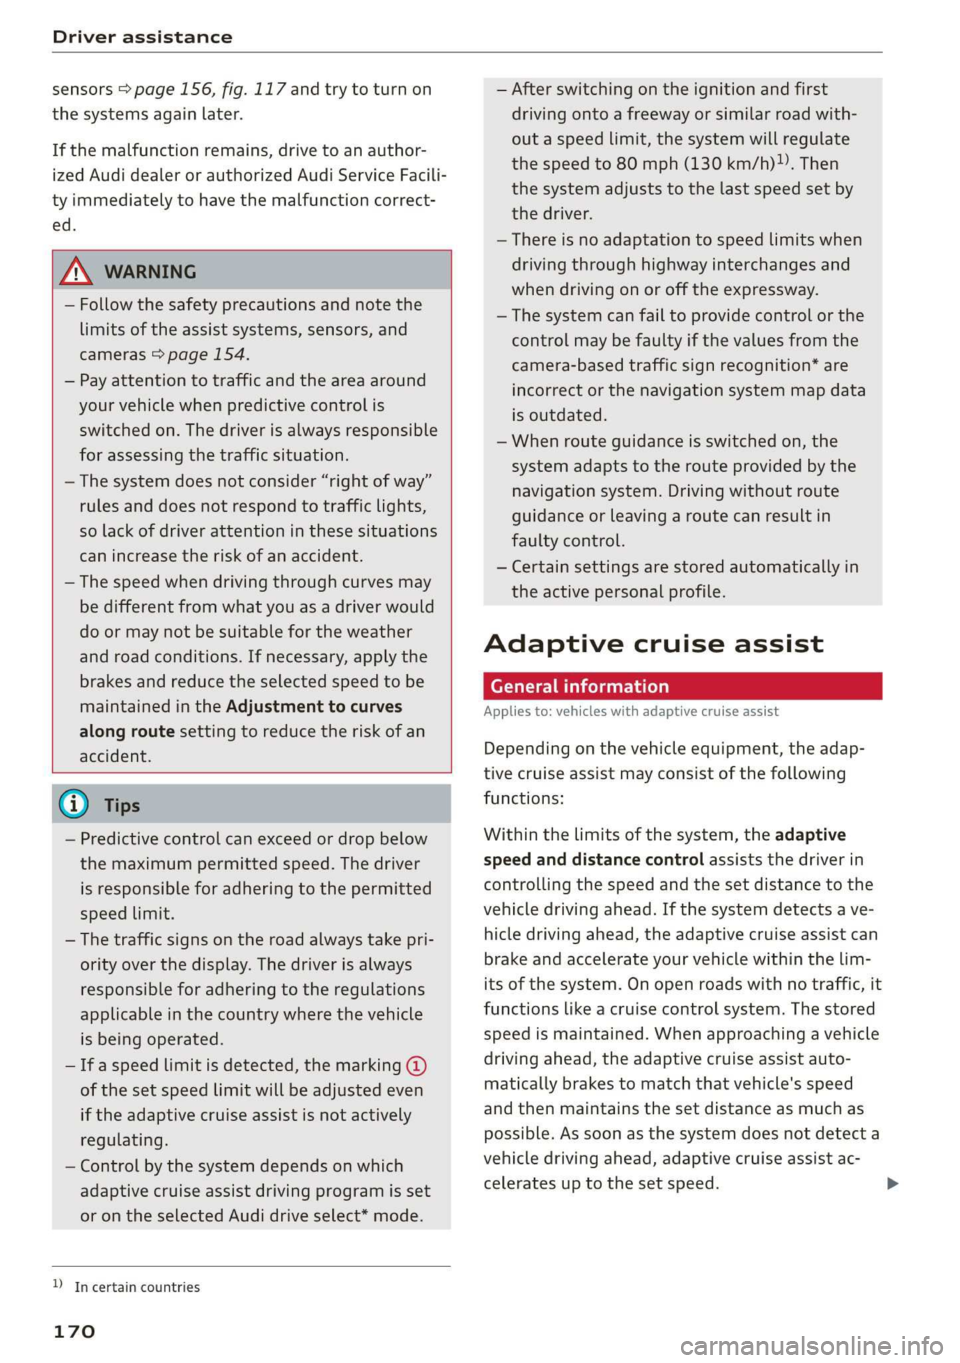 AUDI A8 2020  Owners Manual Driver assistance 
  
sensors > page 156, fig. 117 and try to turn on 
the systems again later. 
If the malfunction remains, drive to an author- 
ized Audi dealer or authorized Audi Service Facili- 
t